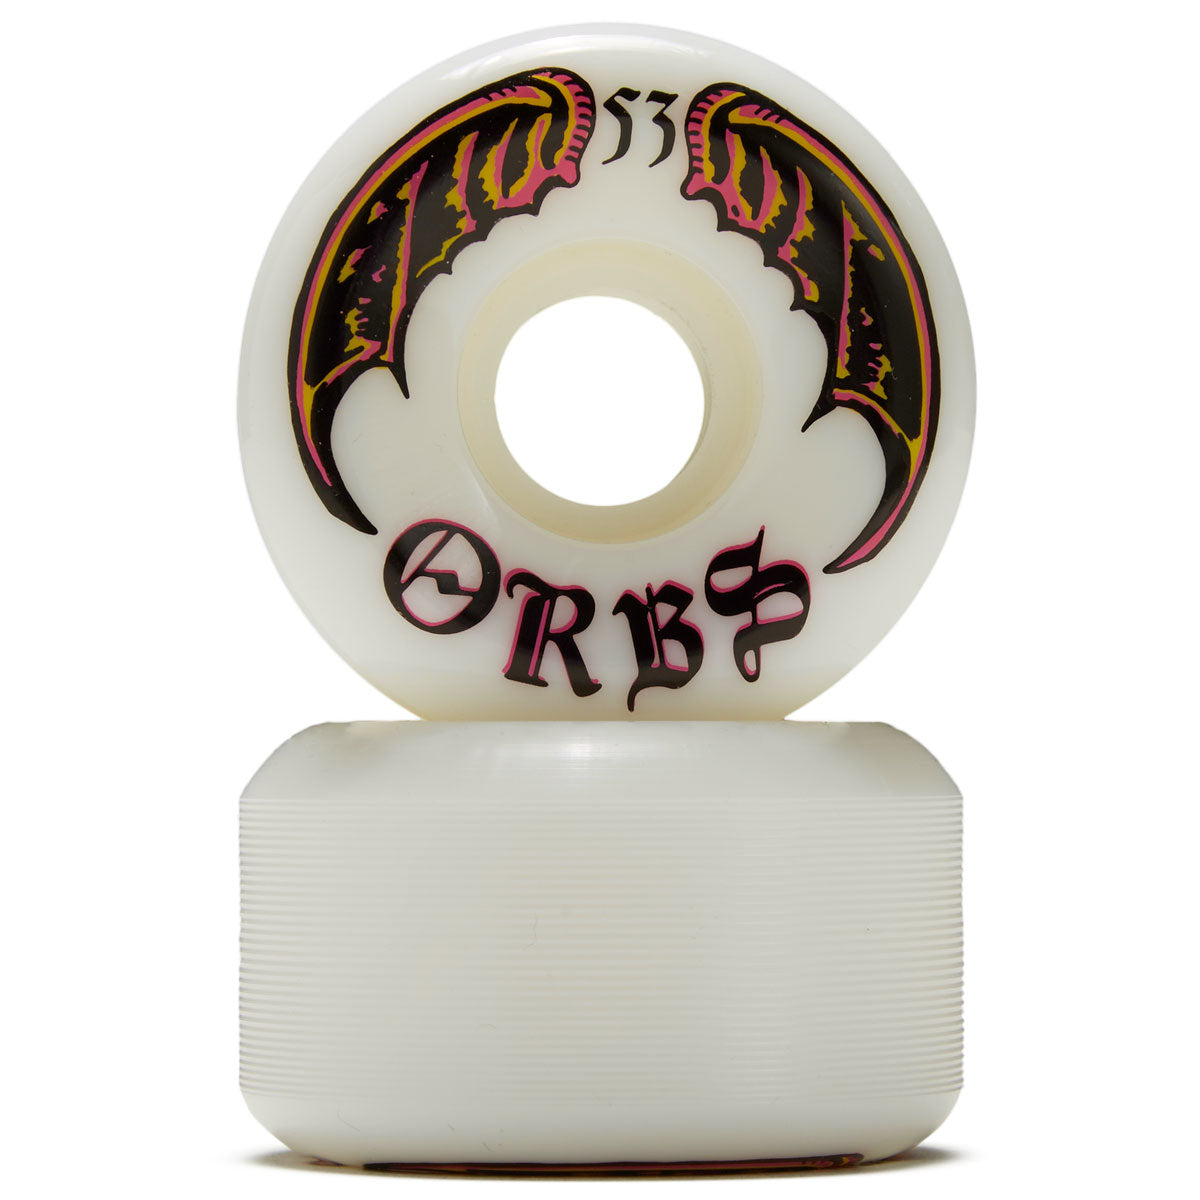 Welcome Orbs Specters Conical 99A Skateboard Wheels - White - 53mm image 2